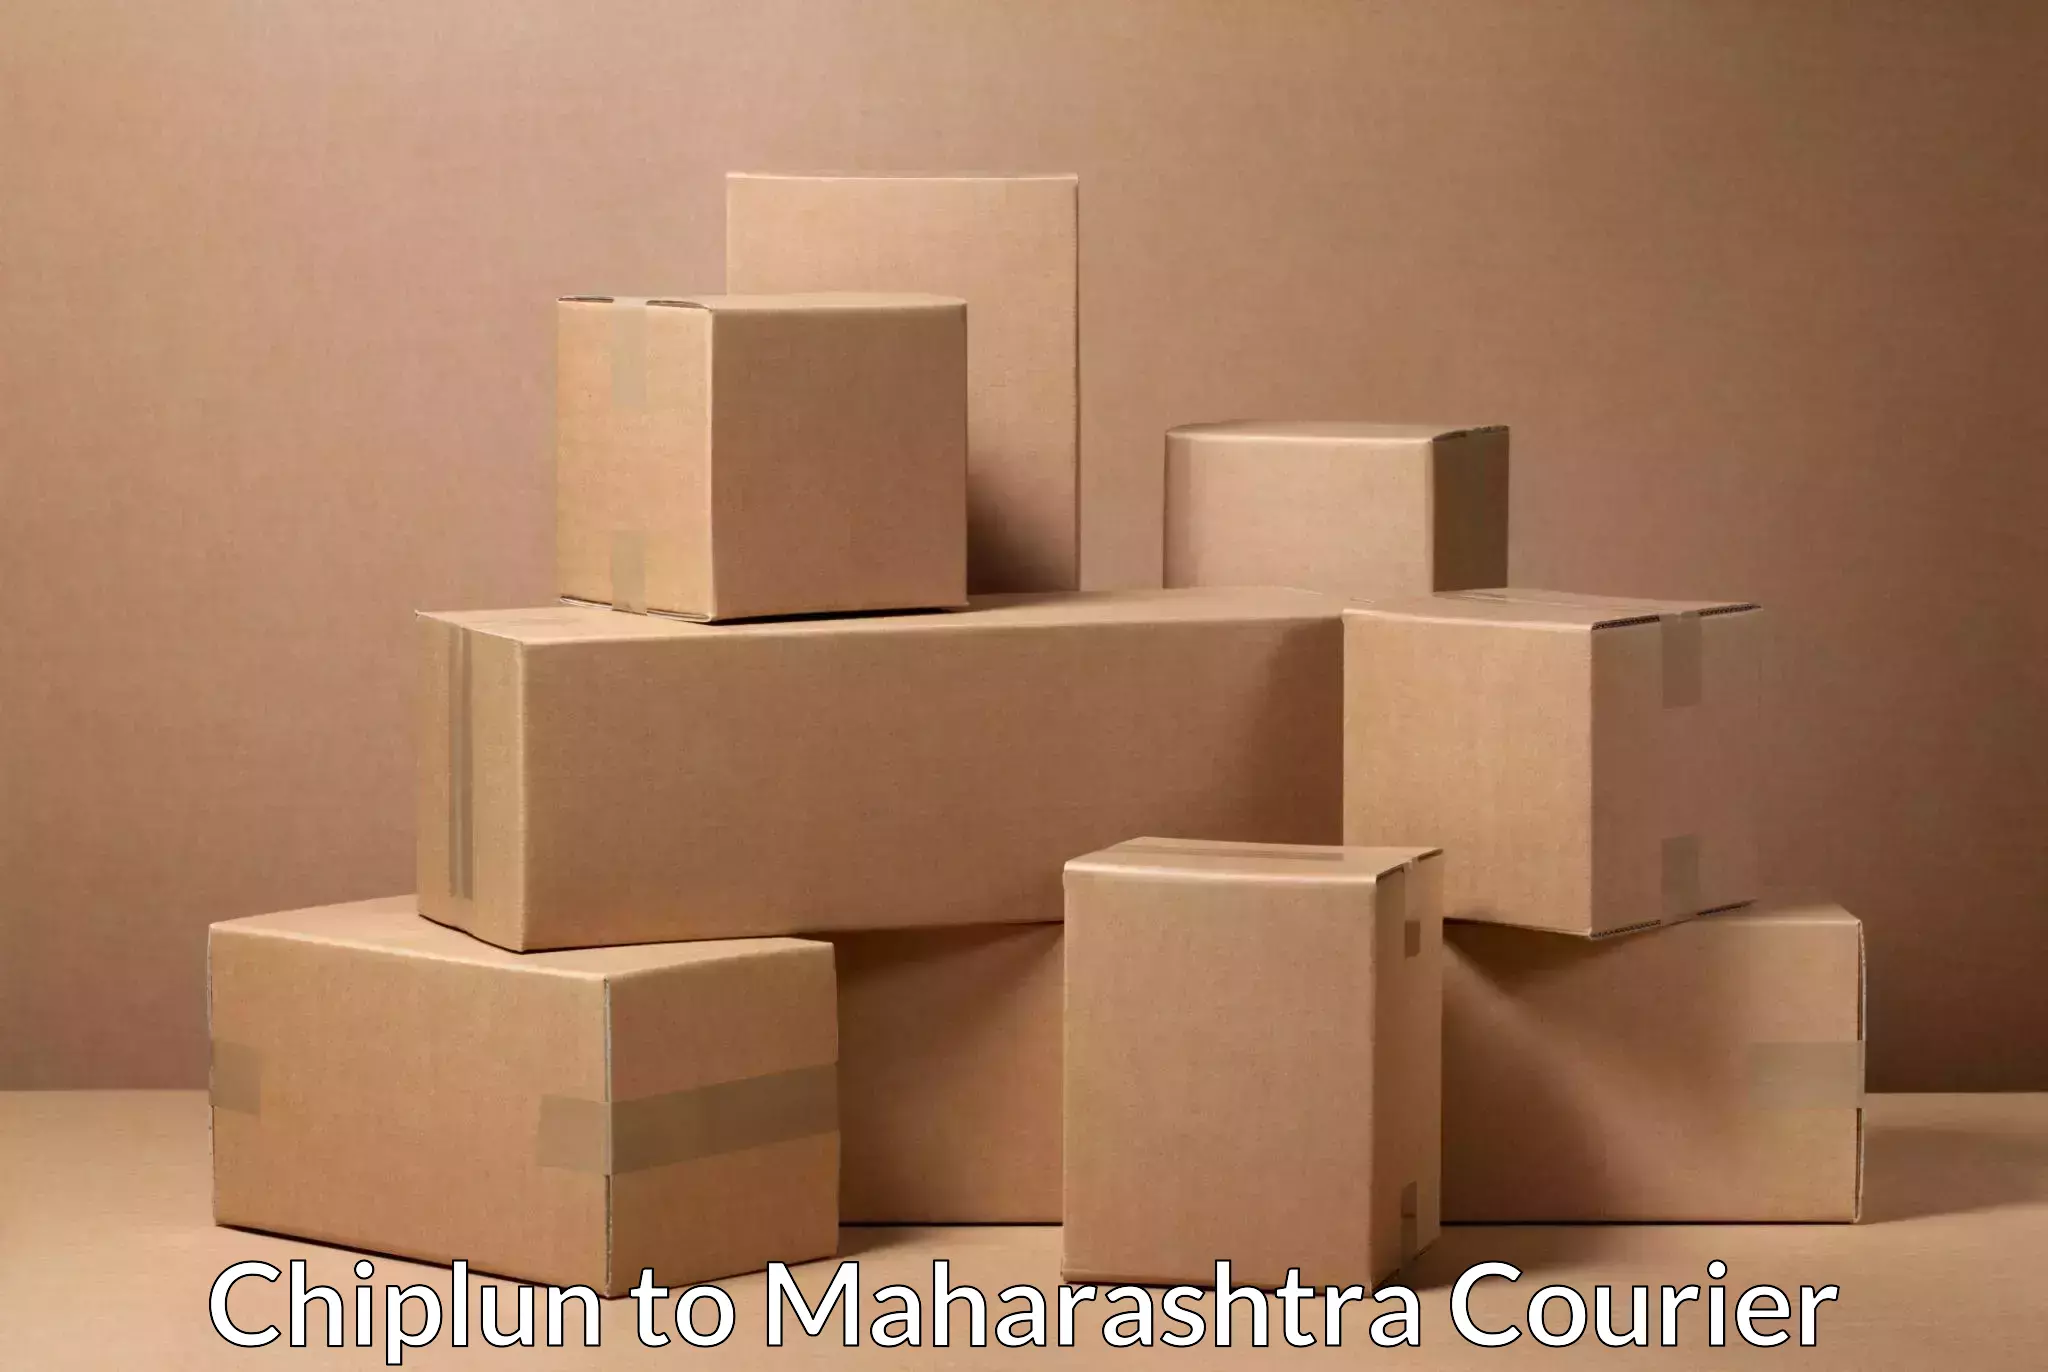 Multi-national courier services Chiplun to Vita